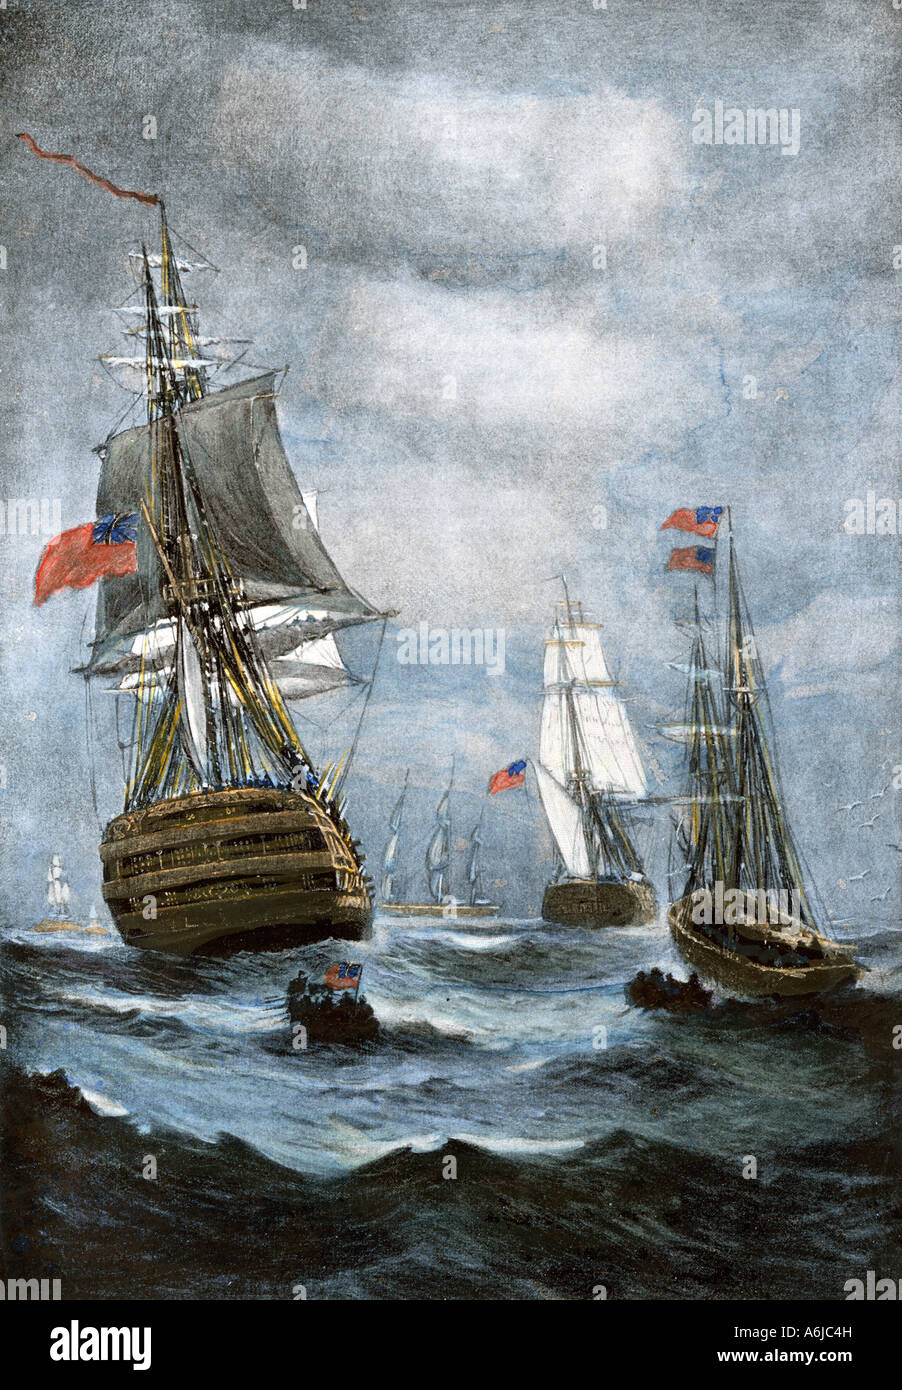 British ships blockading Chesapeake Bay at the outset of the War of 1812. Hand-colored halftone of an illustration Stock Photo